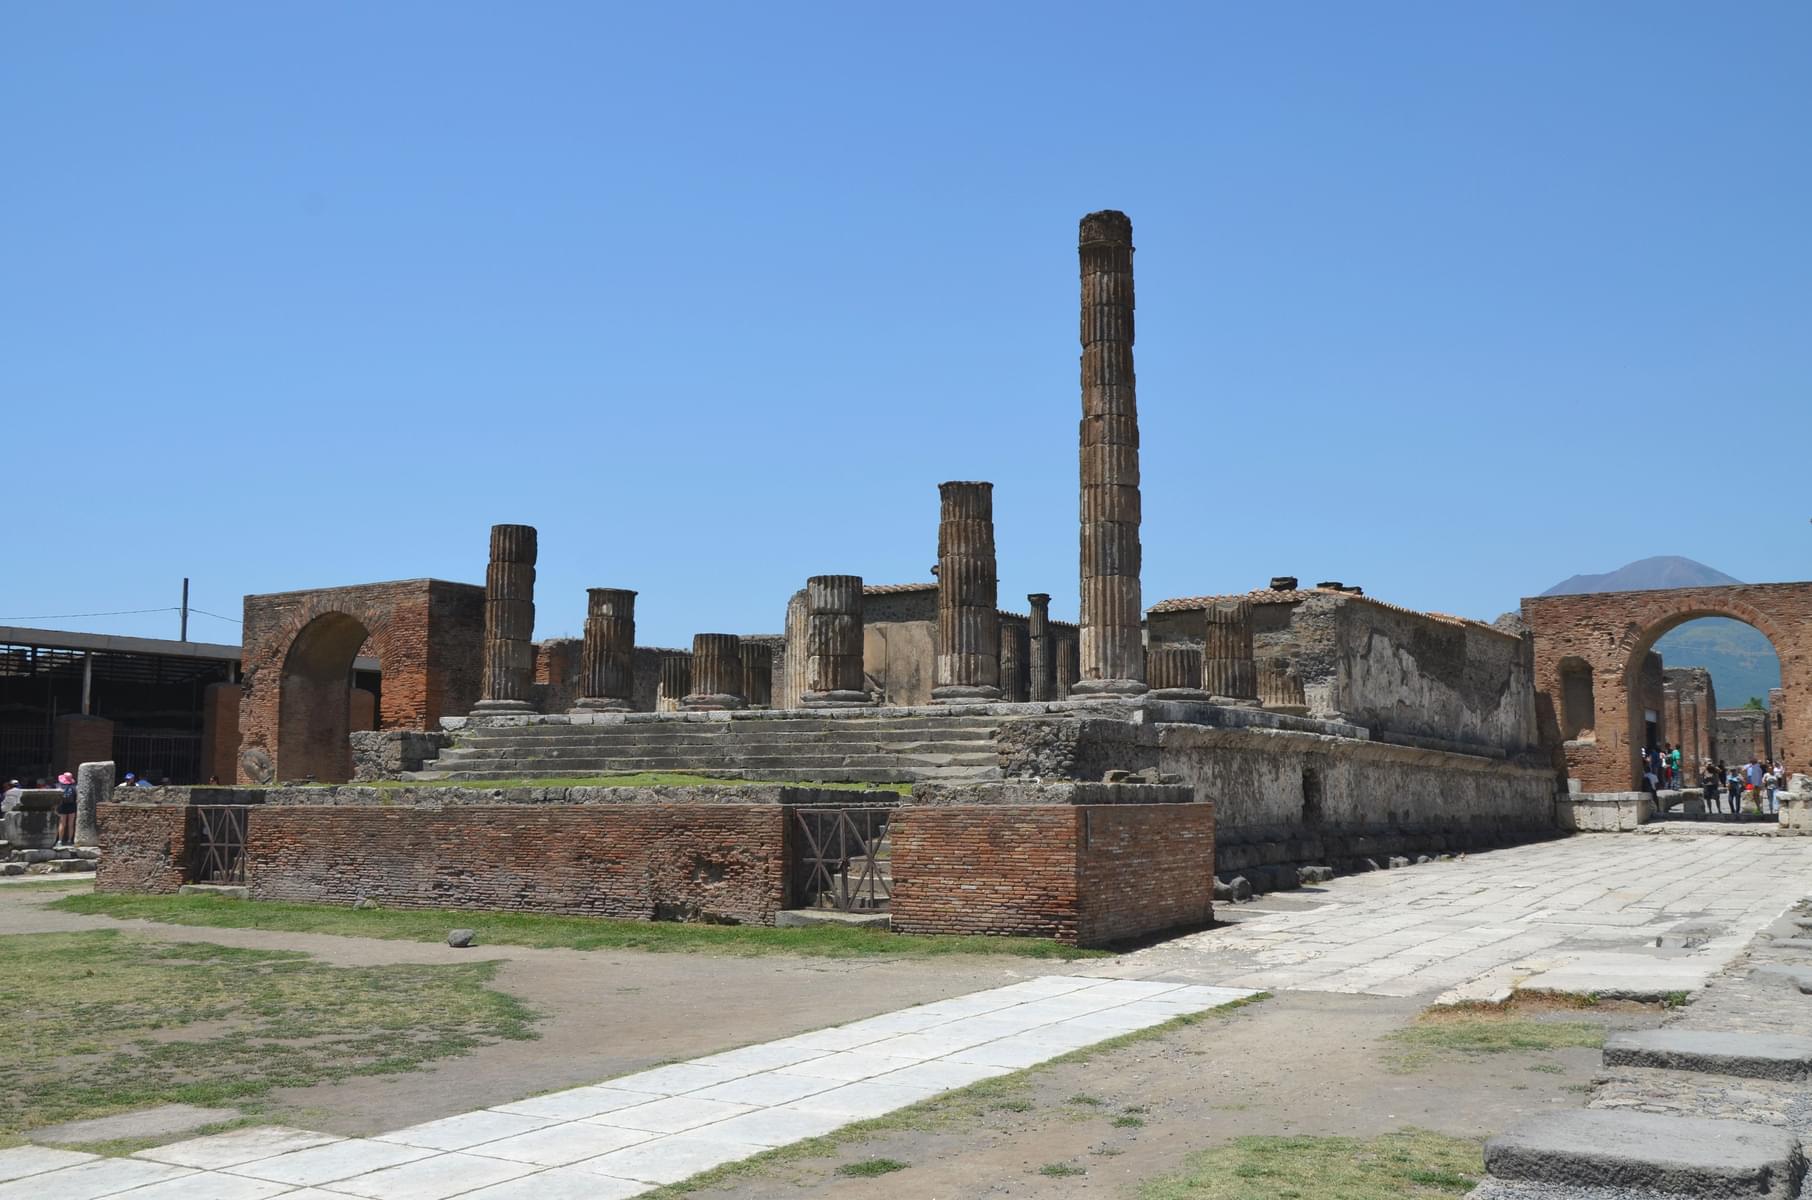 Why Visit the Forum at Pompeii?